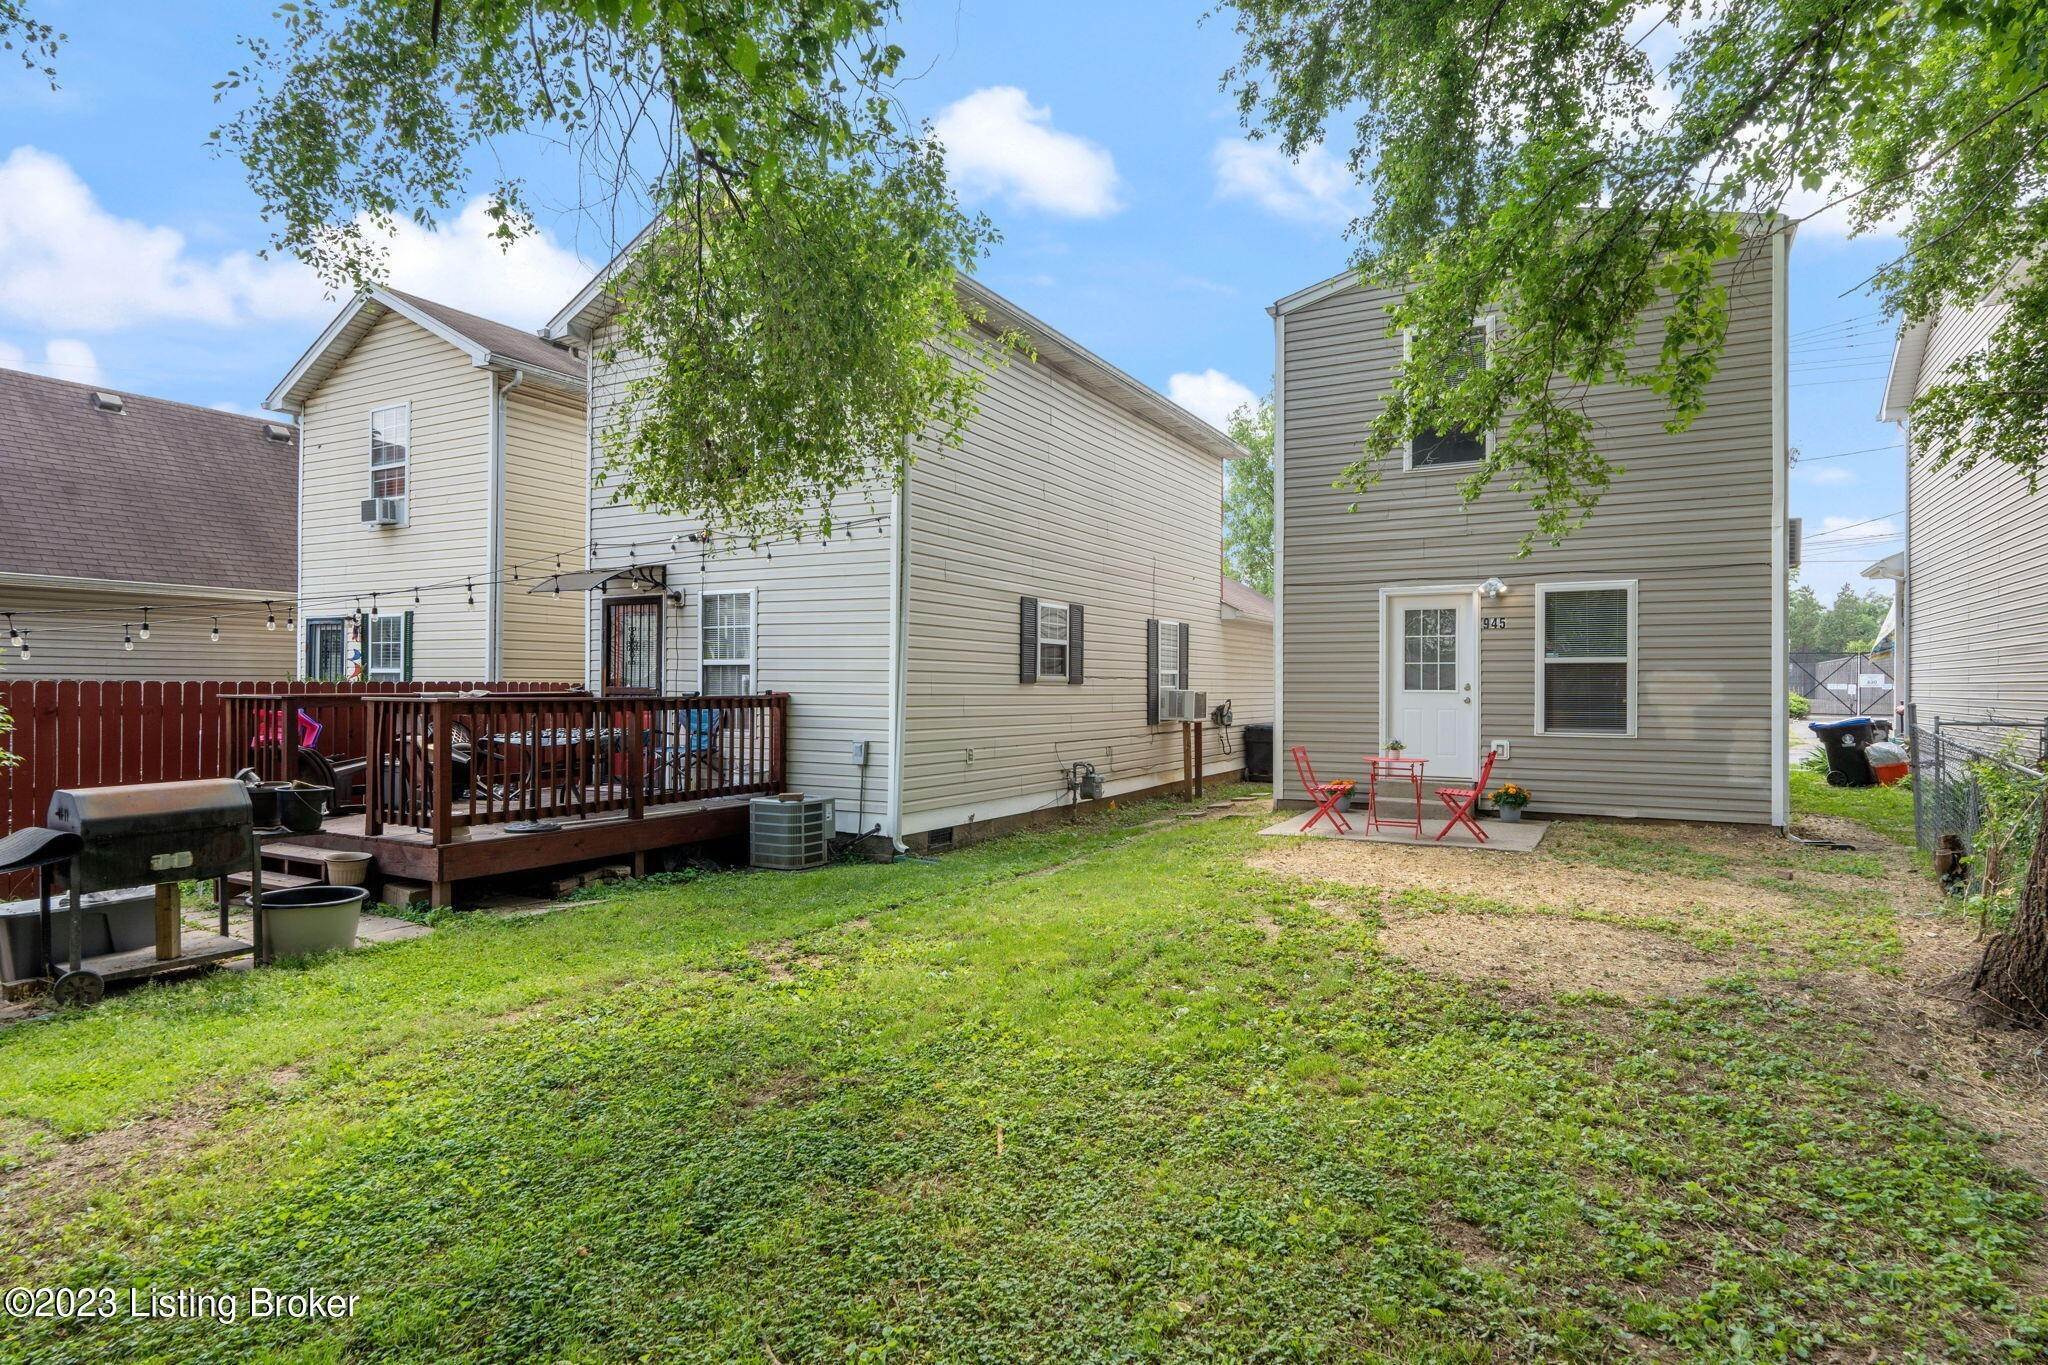 30. Single Family at Louisville, KY 40203